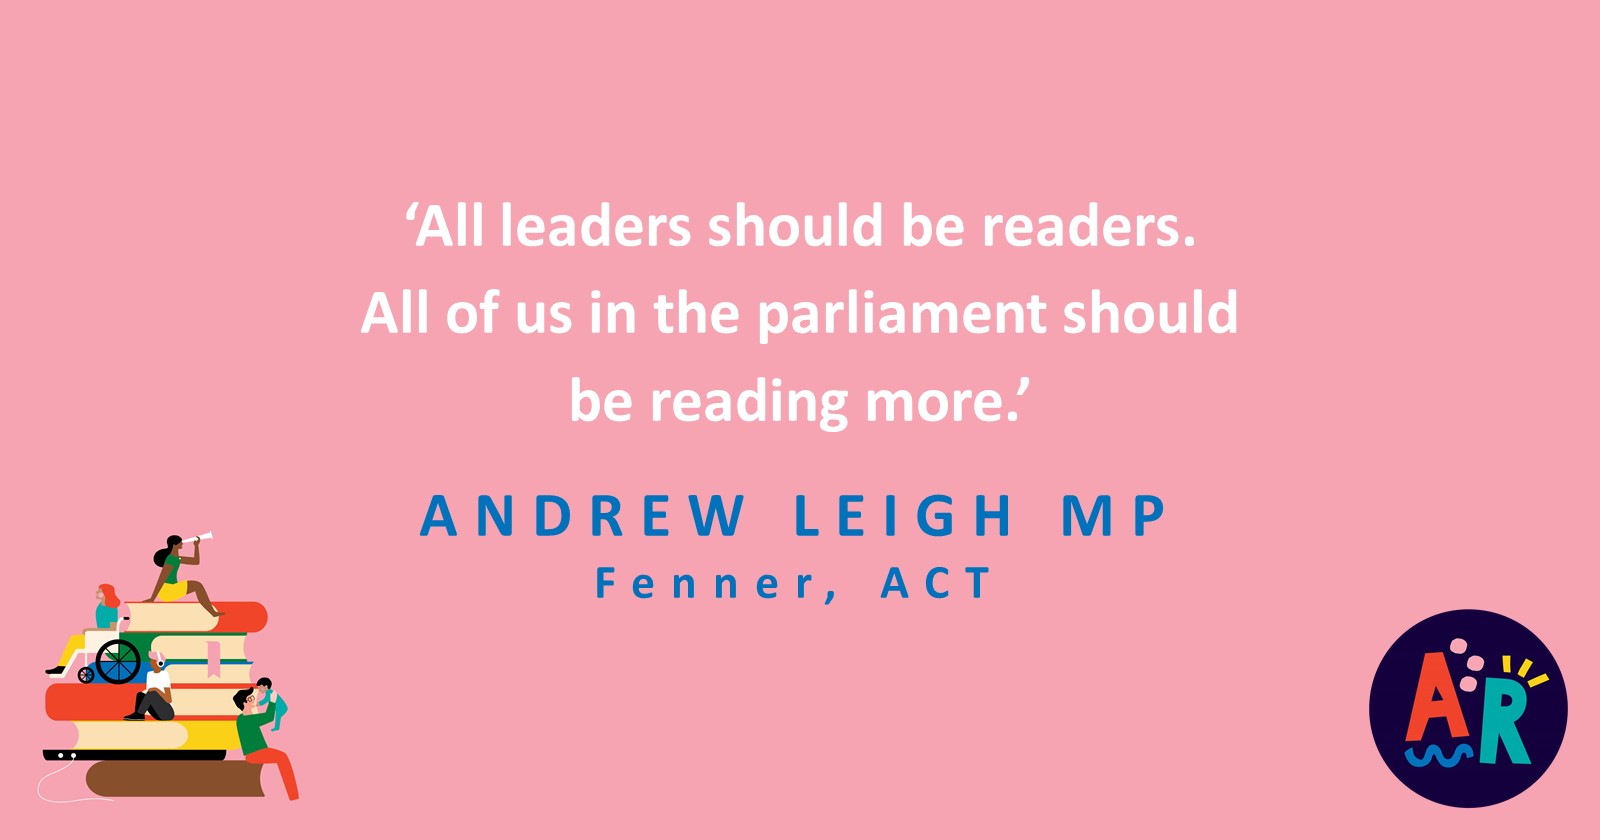 A quote from Andrew Leigh MP for Fenner, ACT, reading, 'All leaders should be readers. All of us in the parliament should be reading more.'